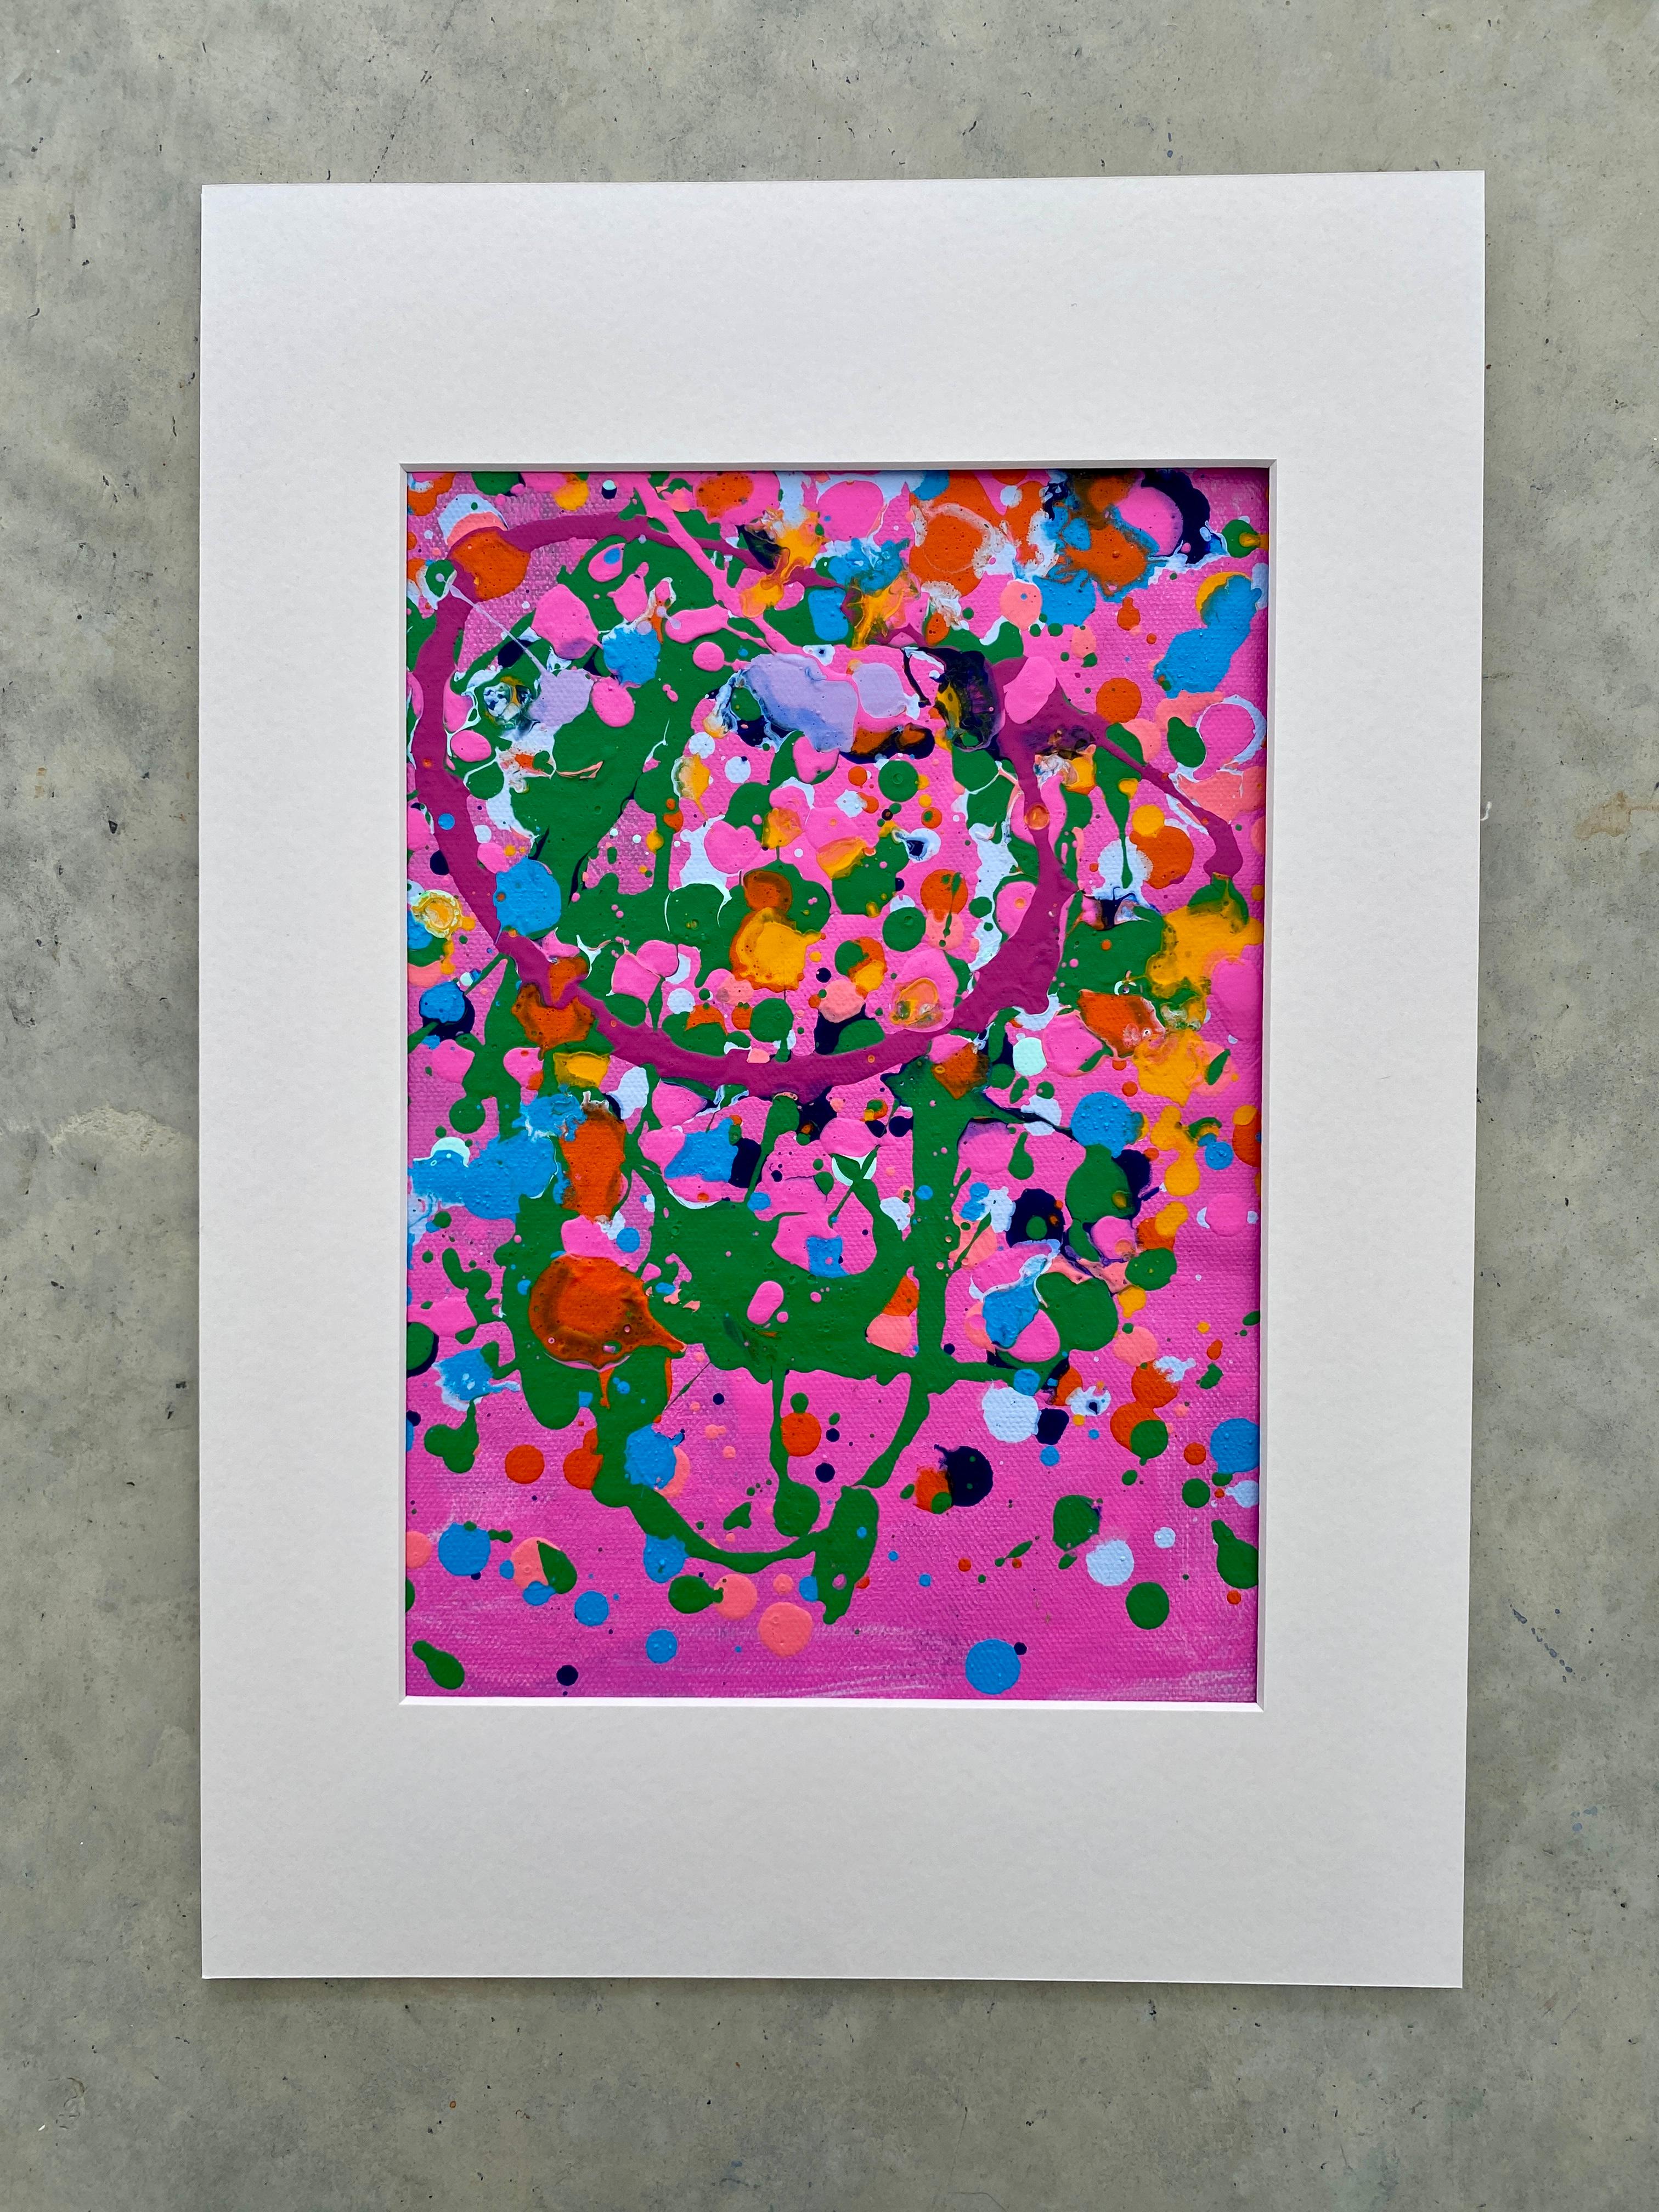 Colorful spatter no7 drip abstract expressionist Jackson Pollock pink green blue - Painting by Kathleen Rhee